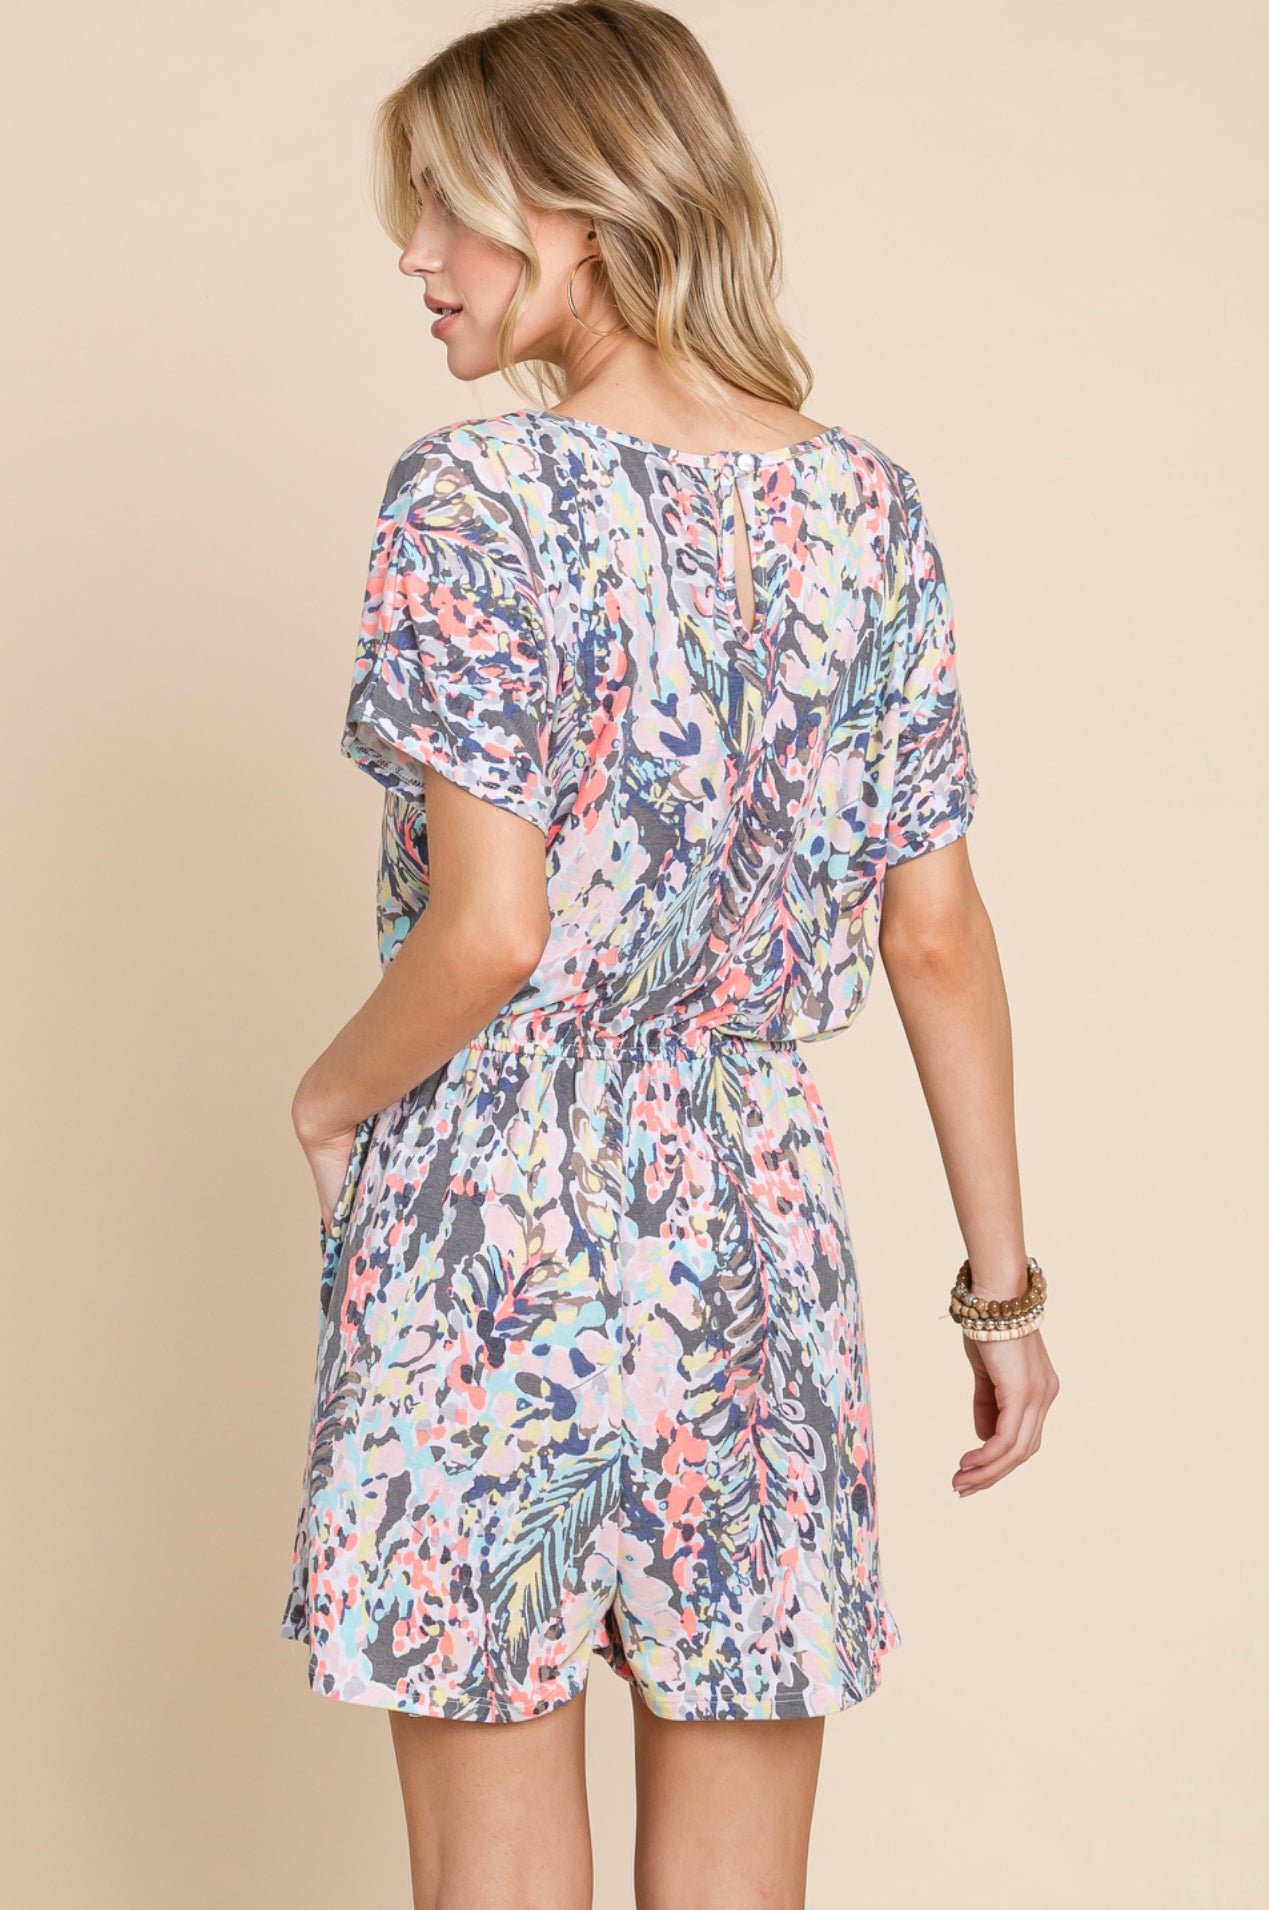 Product details Floral Printed Romper Short sleeves Round neckline Button in the back Elastic Waist Band with string straight hem at bottom Fits true to size *Colors may vary slightly due to monitor resolution and lighting* Southern Bliss Boutique